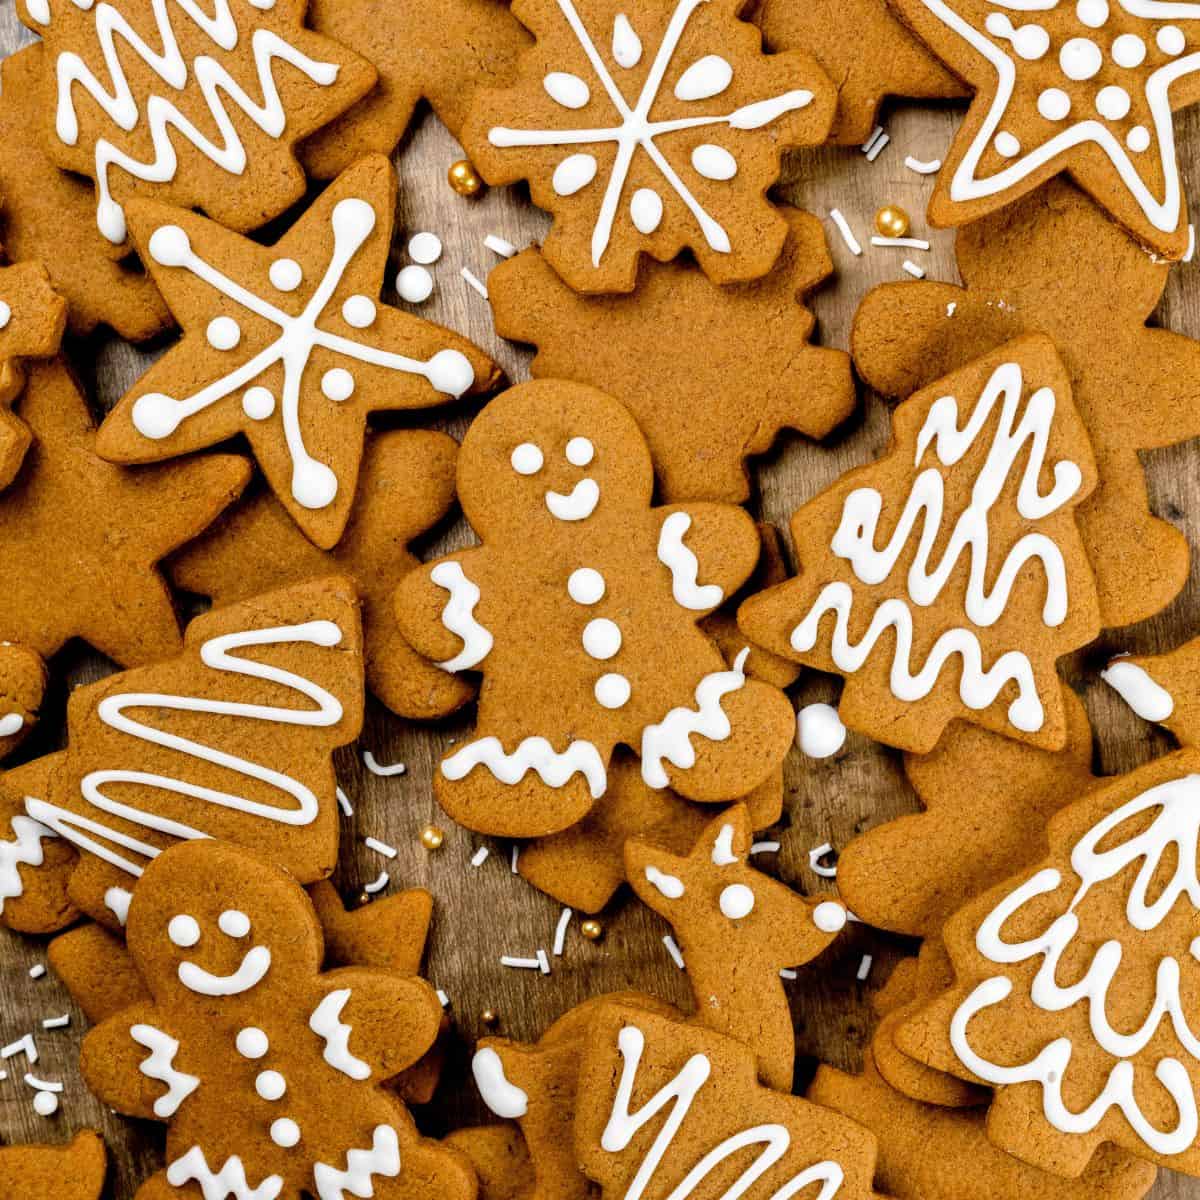 looking at a pile of frosted and unfrosted vegan gingerbread cookies in various shapes like men, trees, and stars. a few sprinkles can be seen. there is white frosting on some of the cookies.